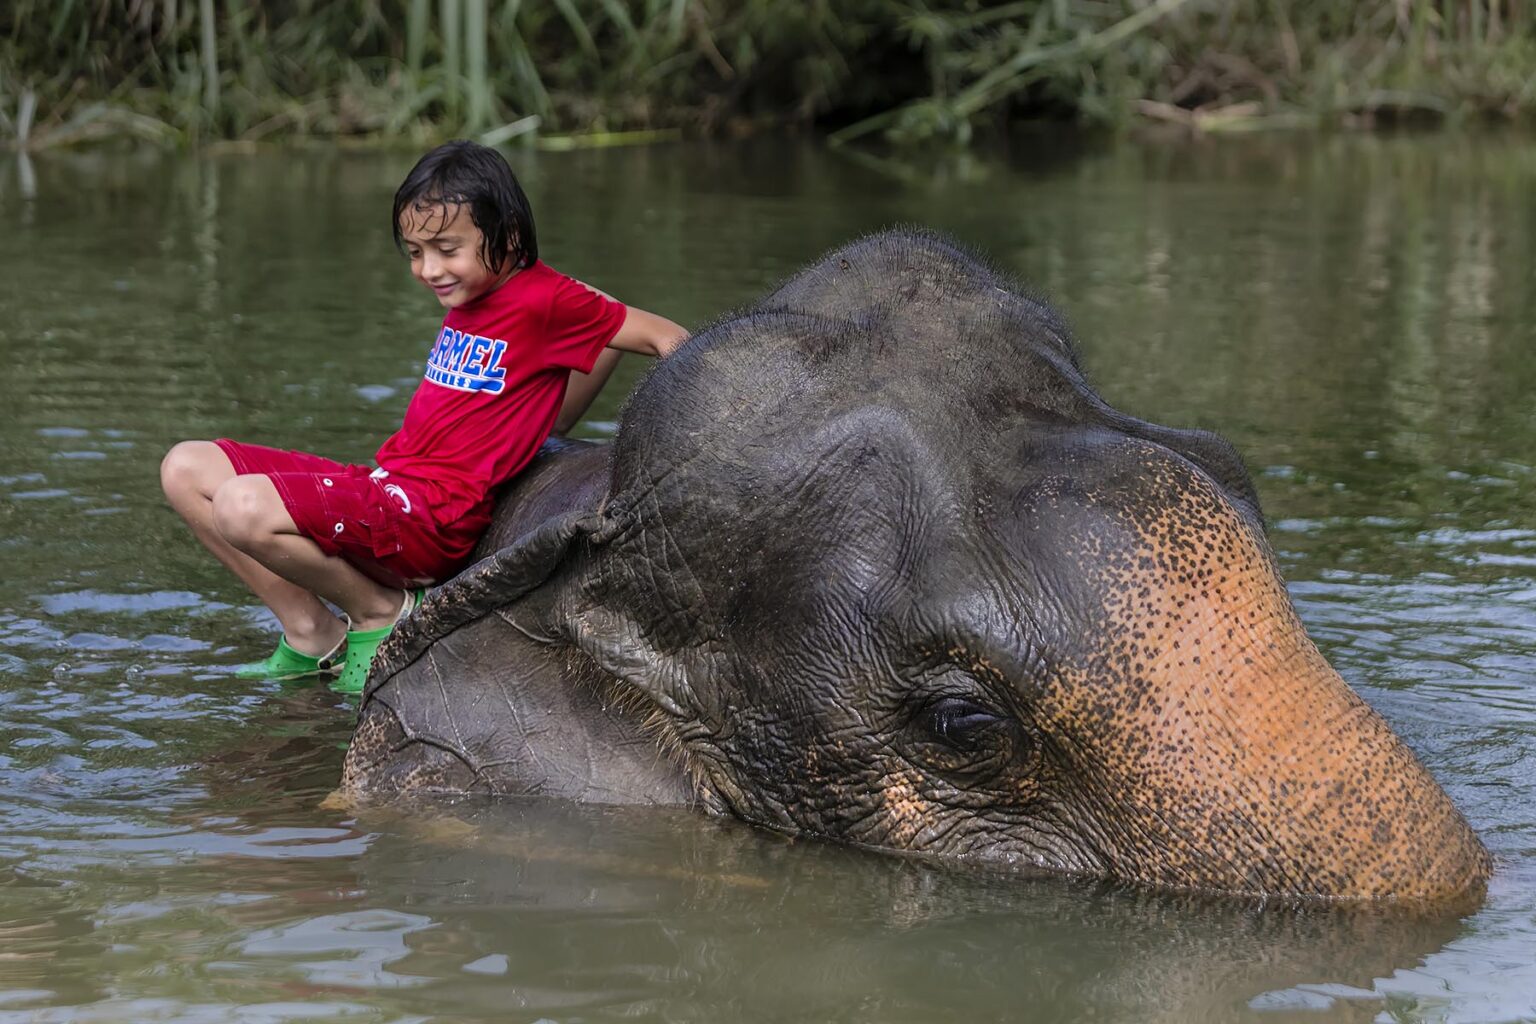 Washing elephants is the humane way to support these animals and their mahoots - KHAO SOK, THAILAND